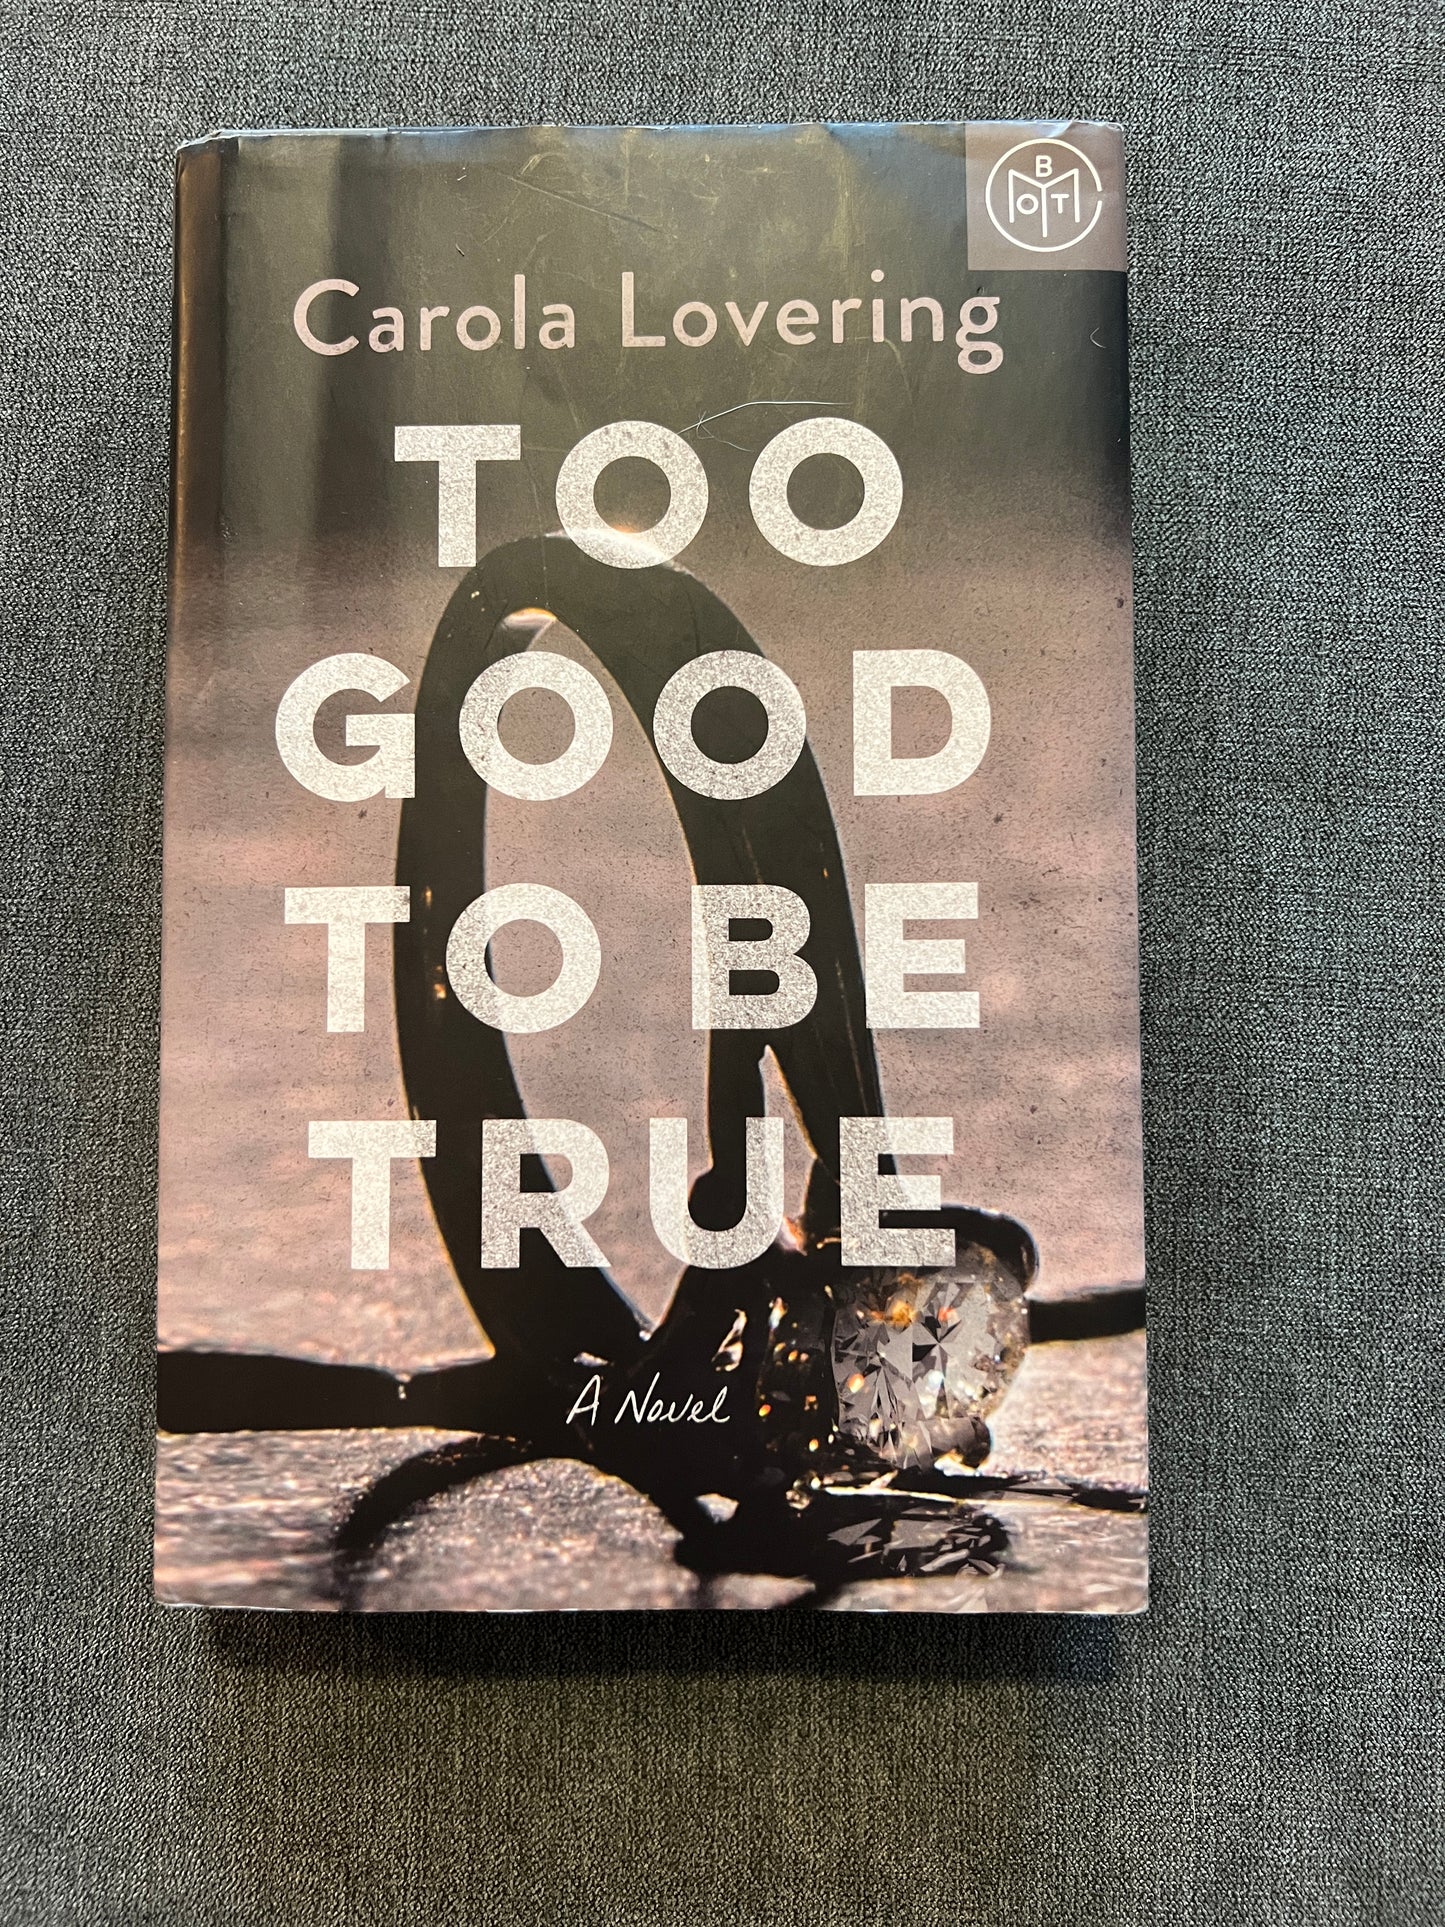 Too Good To Be True by Carola Lovering- PPU 45044 (Liberty Twp)